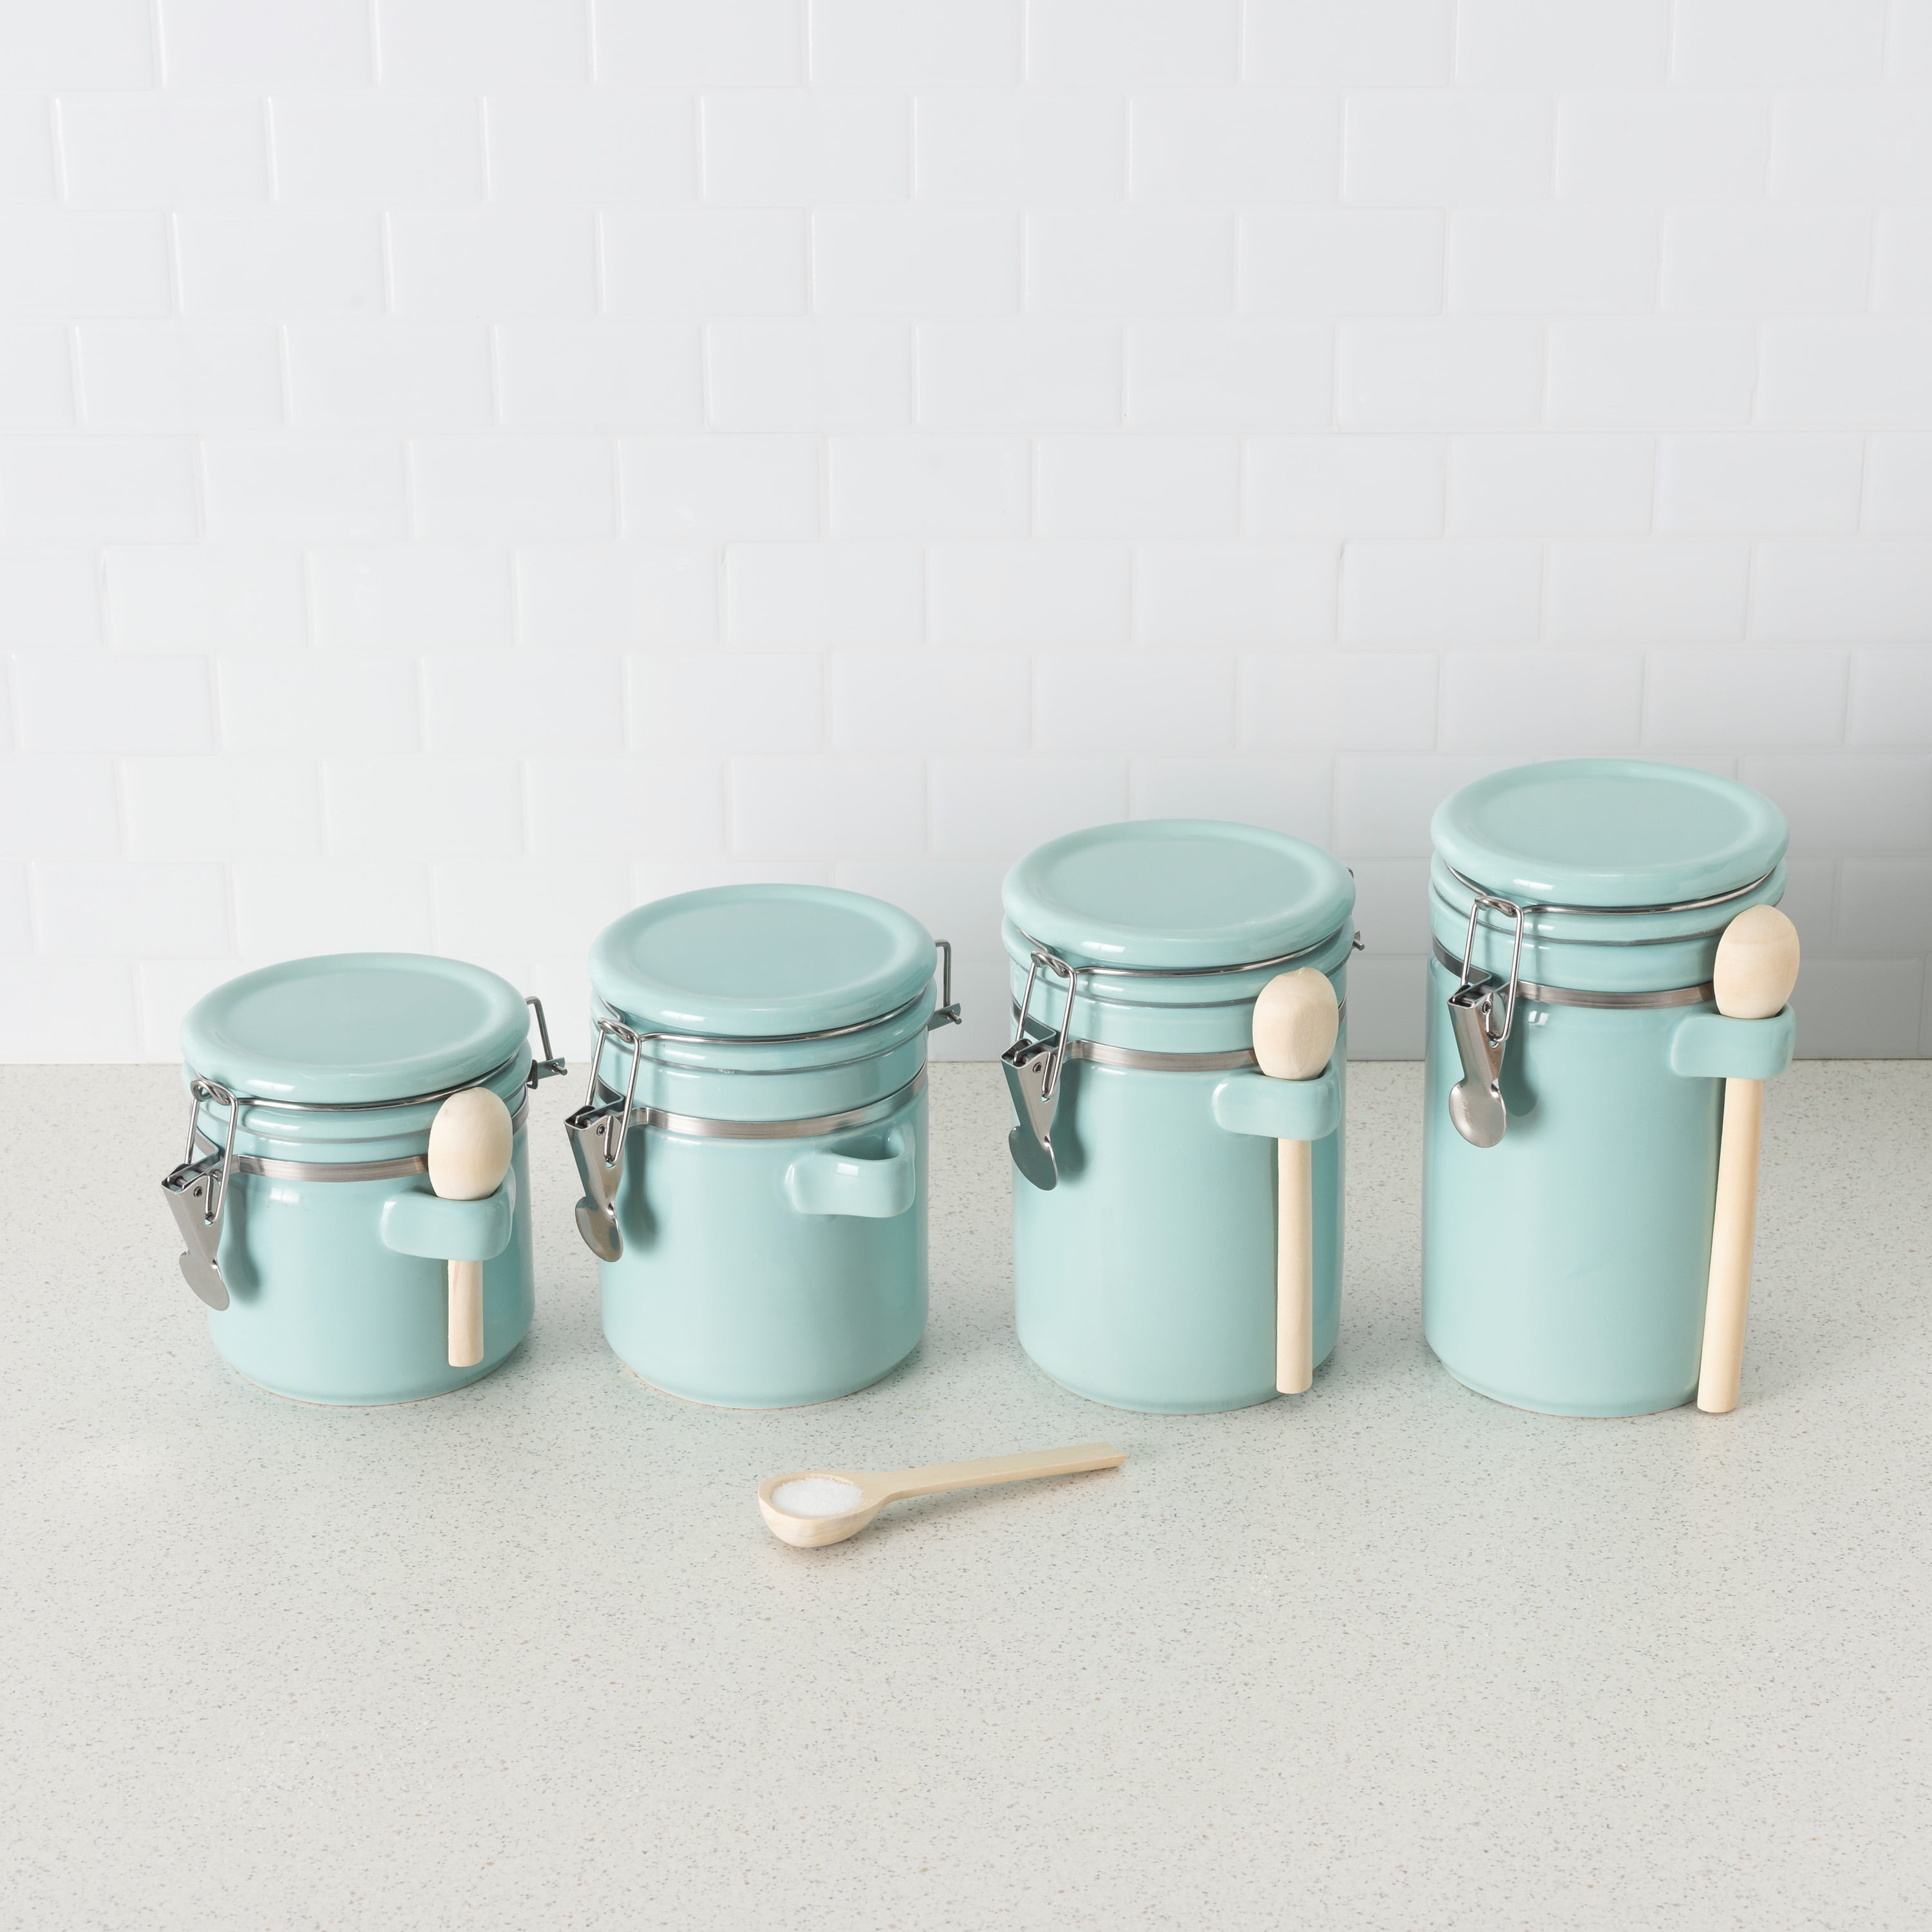 Home Intuition Ceramic Kitchen Canisters Set of 4 with Wooden Spoon Set –  Airtight Containers, Metal Latches for Utmost Freshness – Sugar, Coffee,  Flour, Tea & More